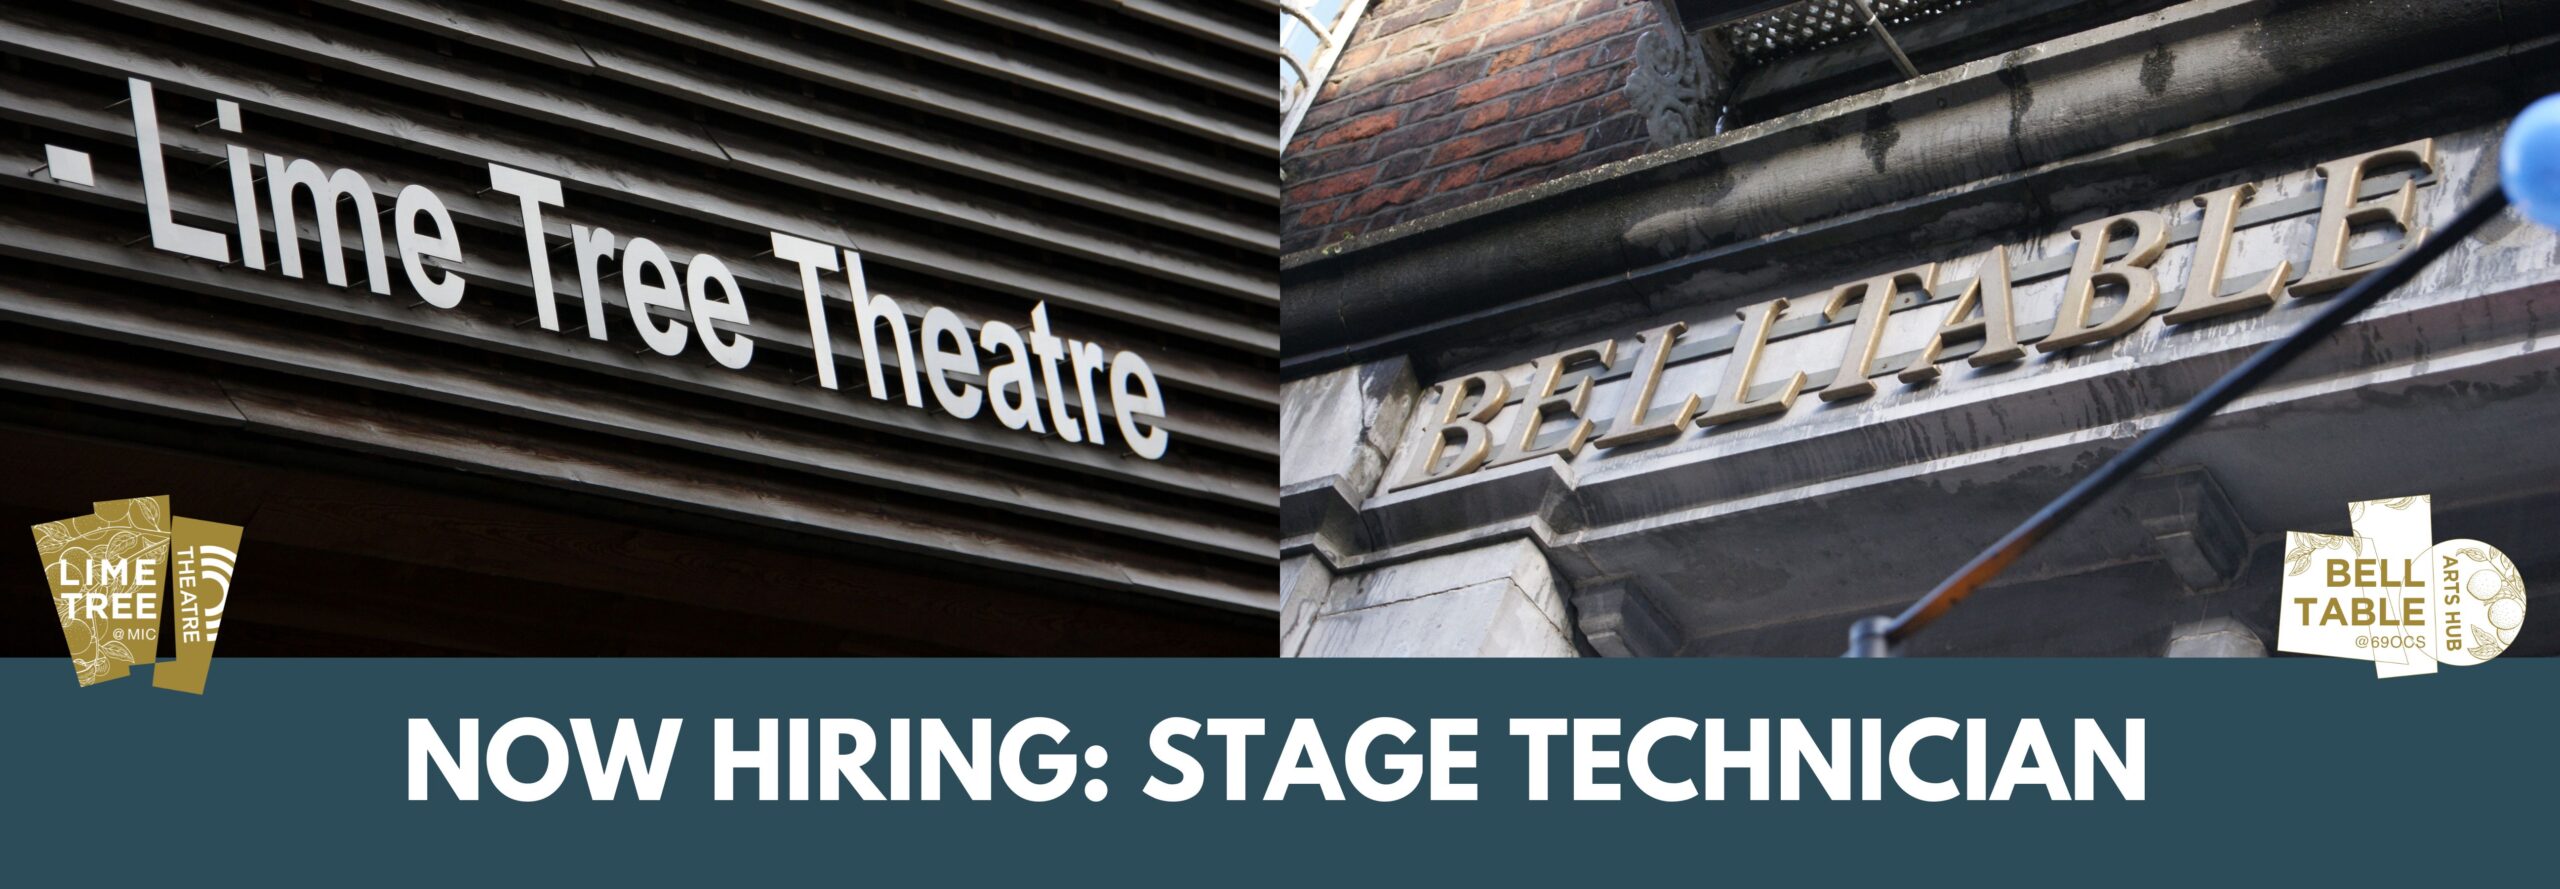 stage technician